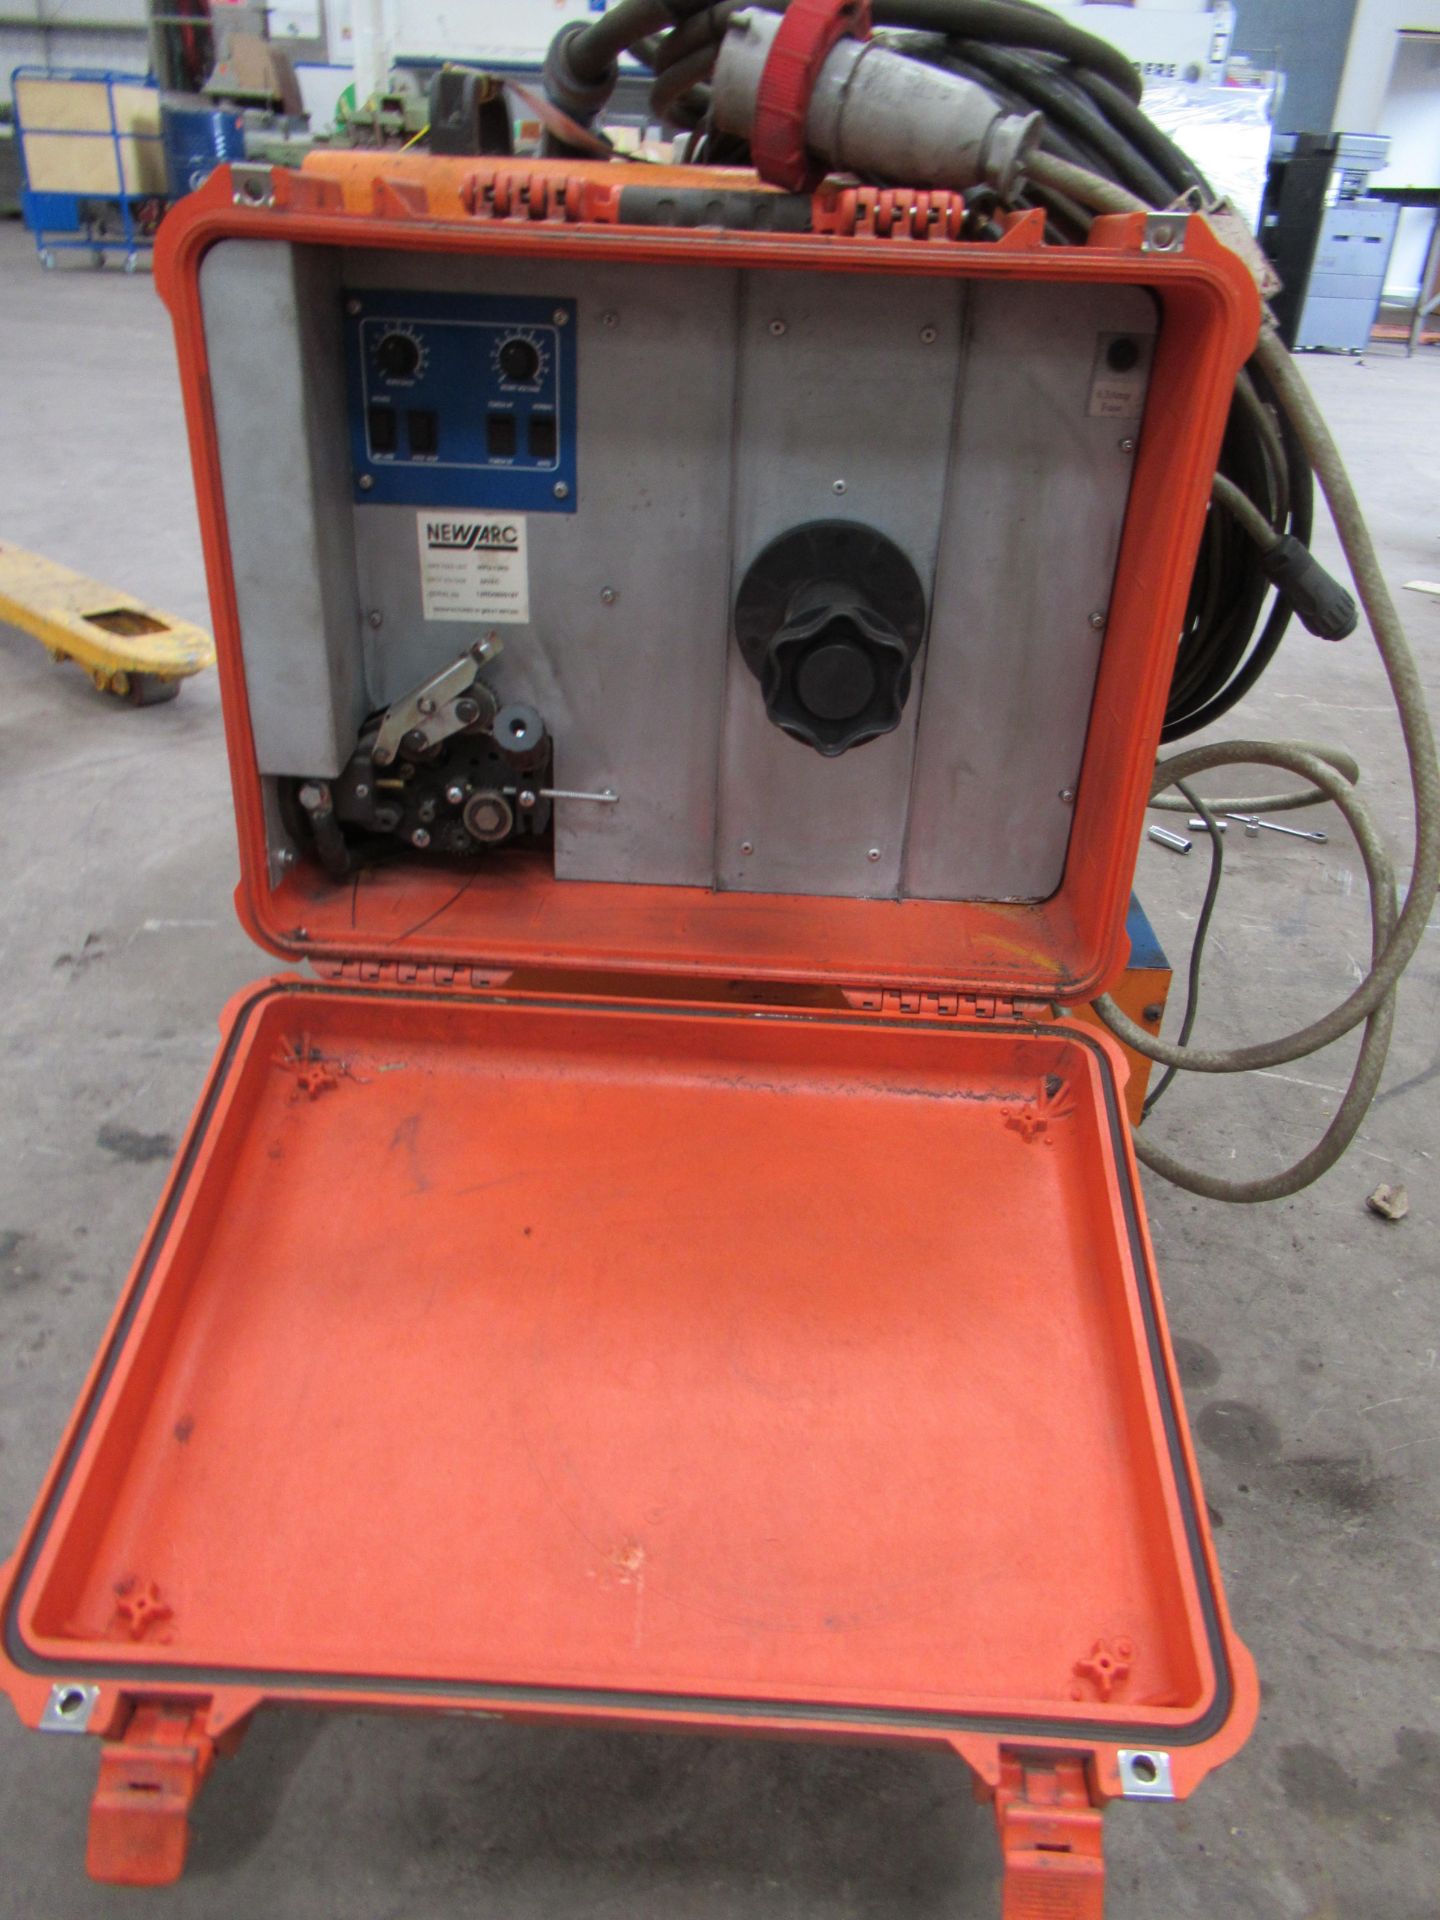 Newarc R4000 MiG welder with water cooler and Newarc WFU12RD wire feed with torch and leads - Image 5 of 9